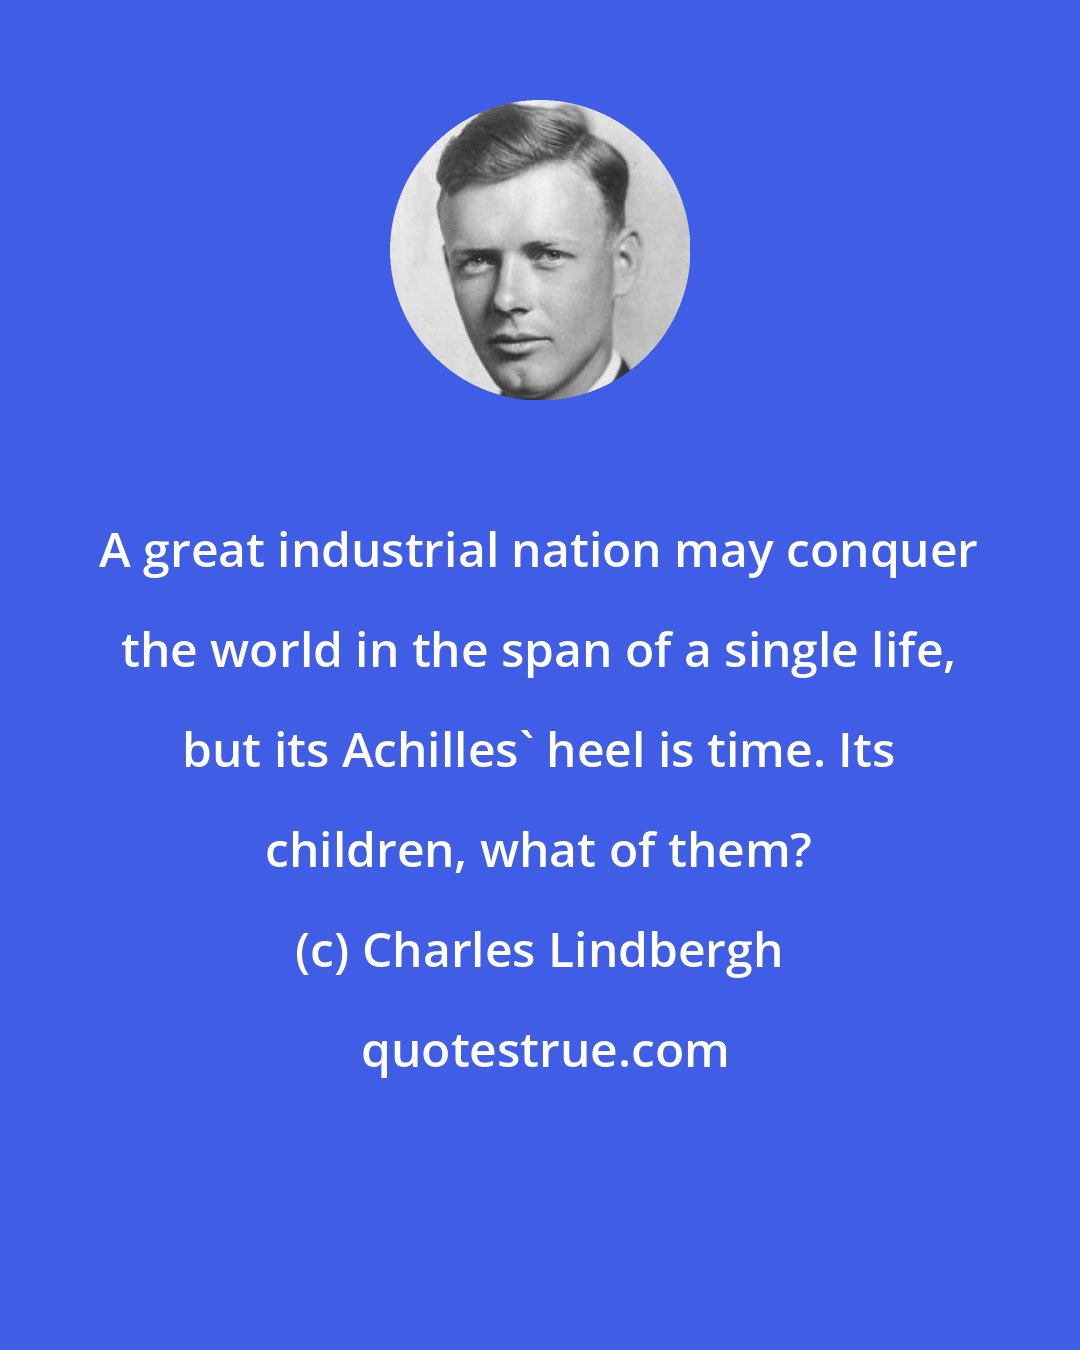 Charles Lindbergh: A great industrial nation may conquer the world in the span of a single life, but its Achilles' heel is time. Its children, what of them?